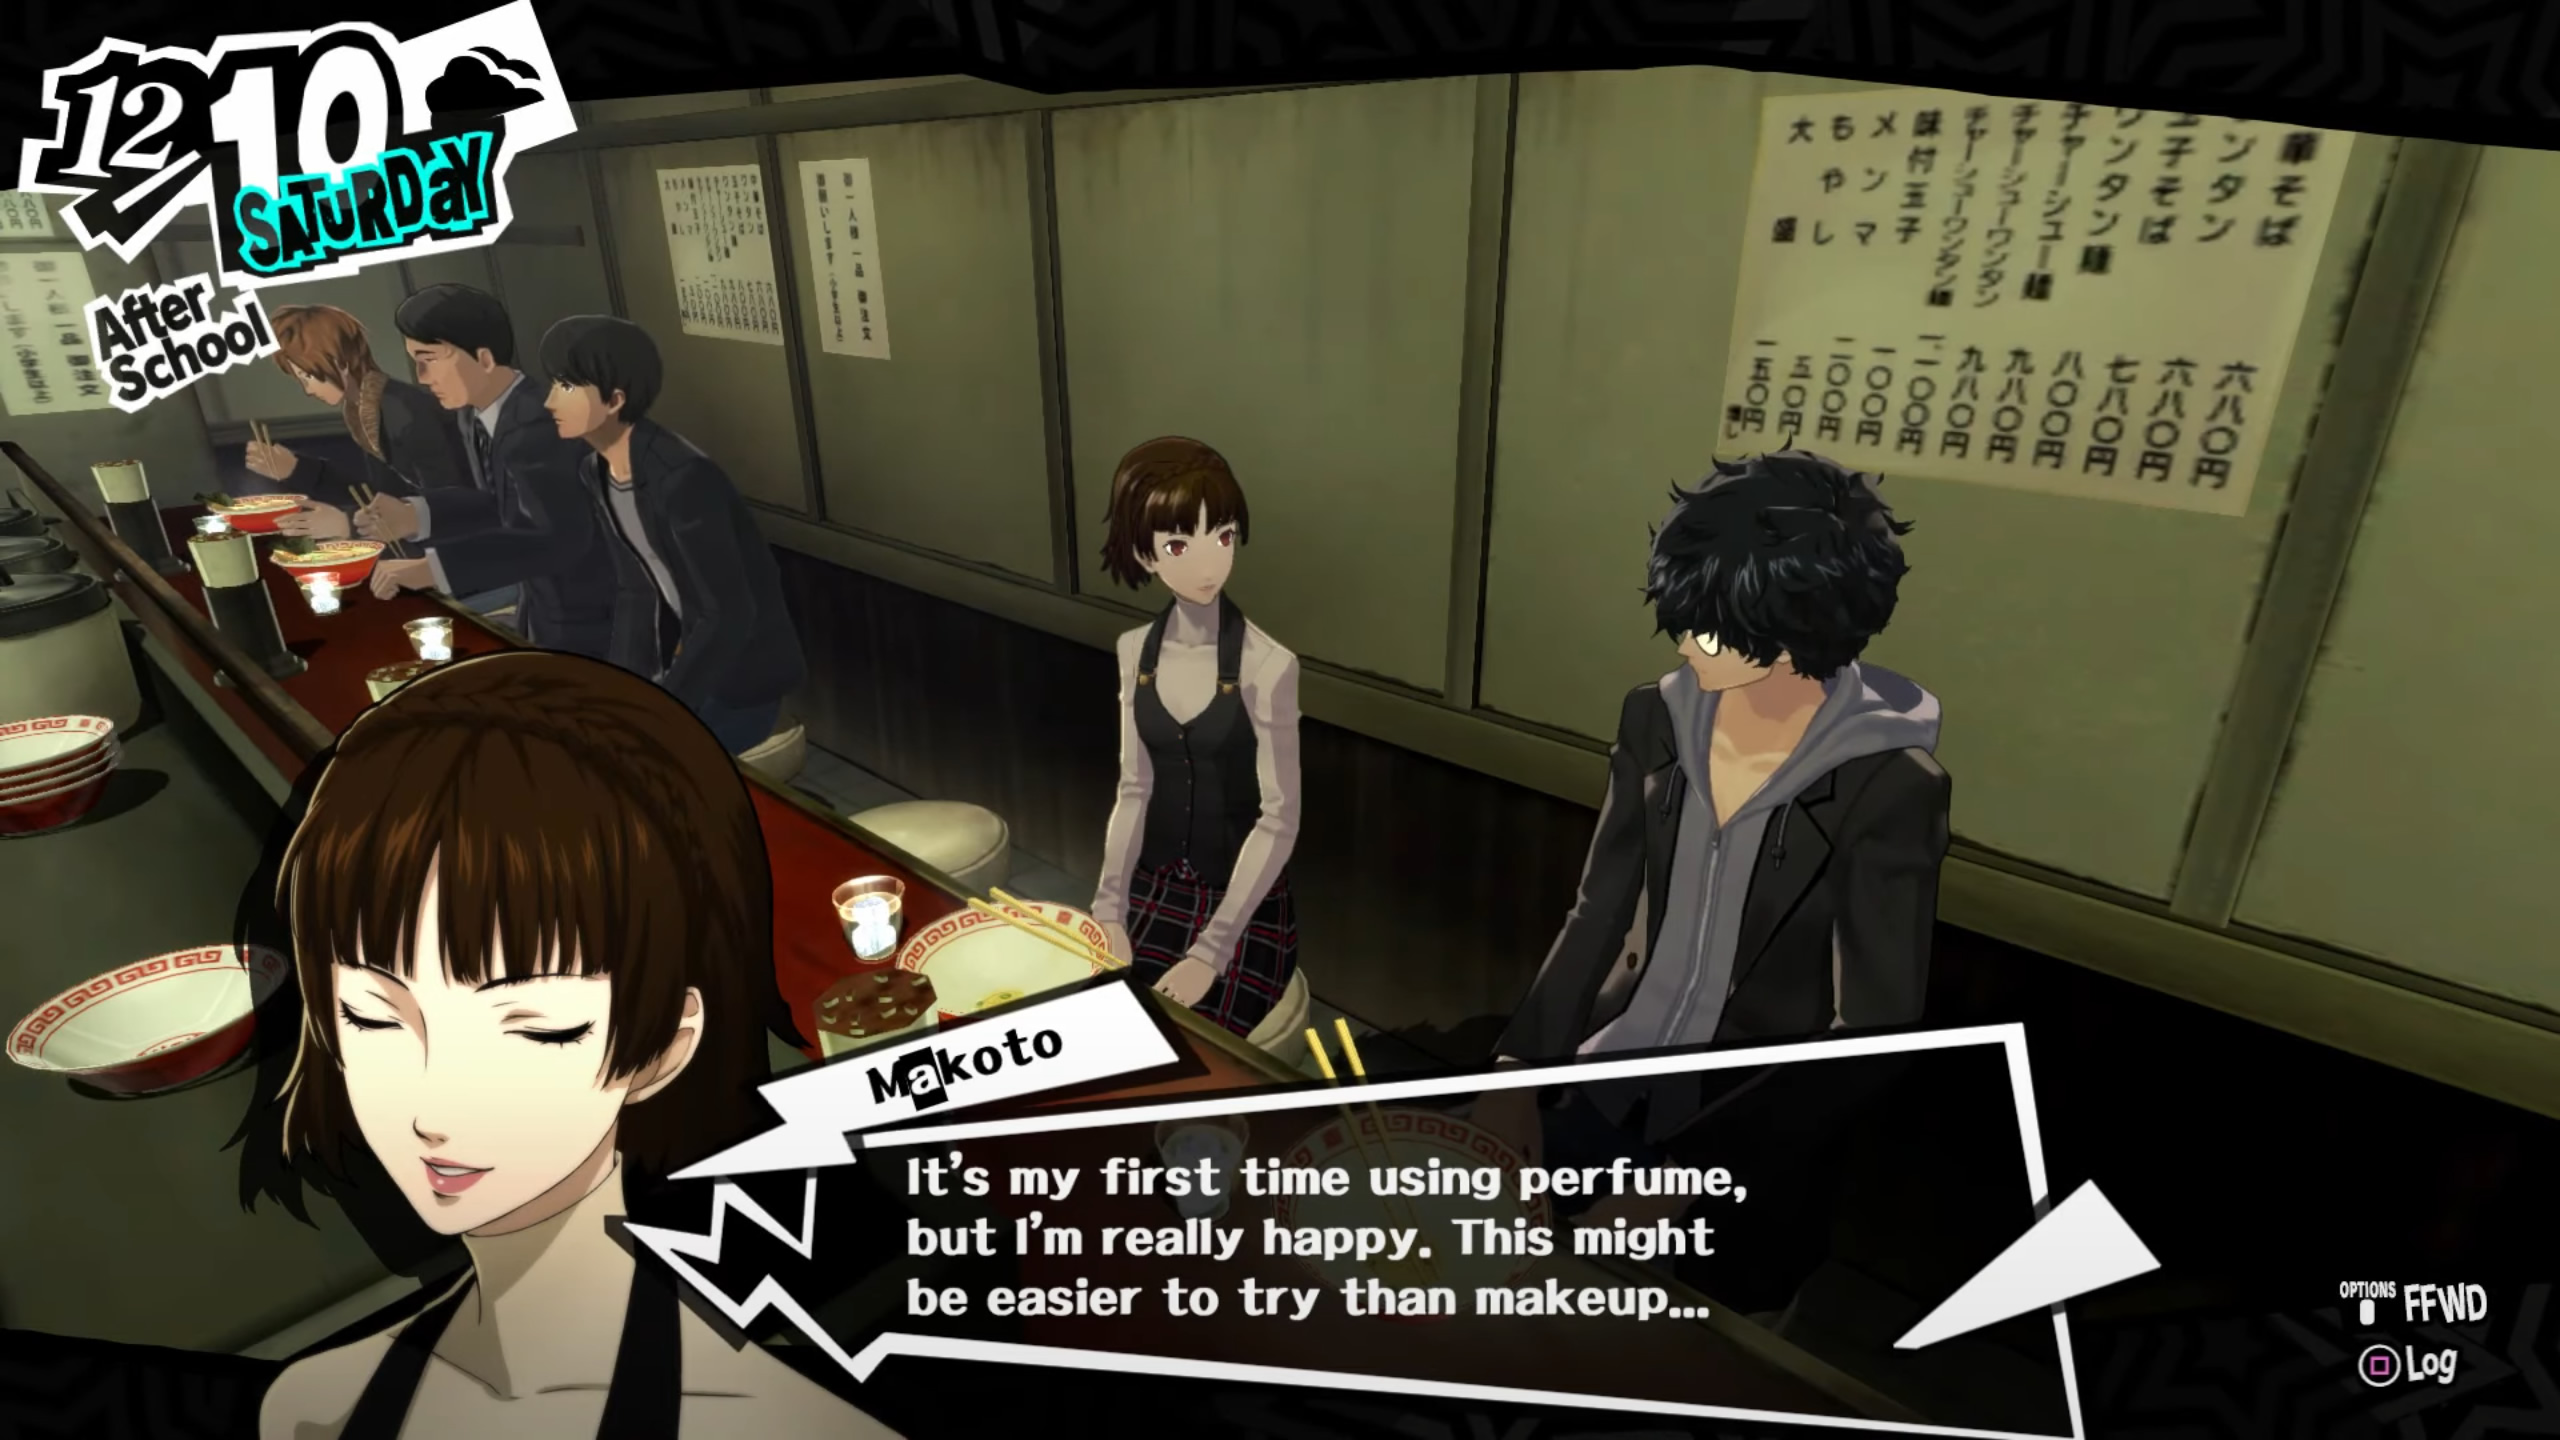 Persona 5 Royal answers - everything you need to pass school exams